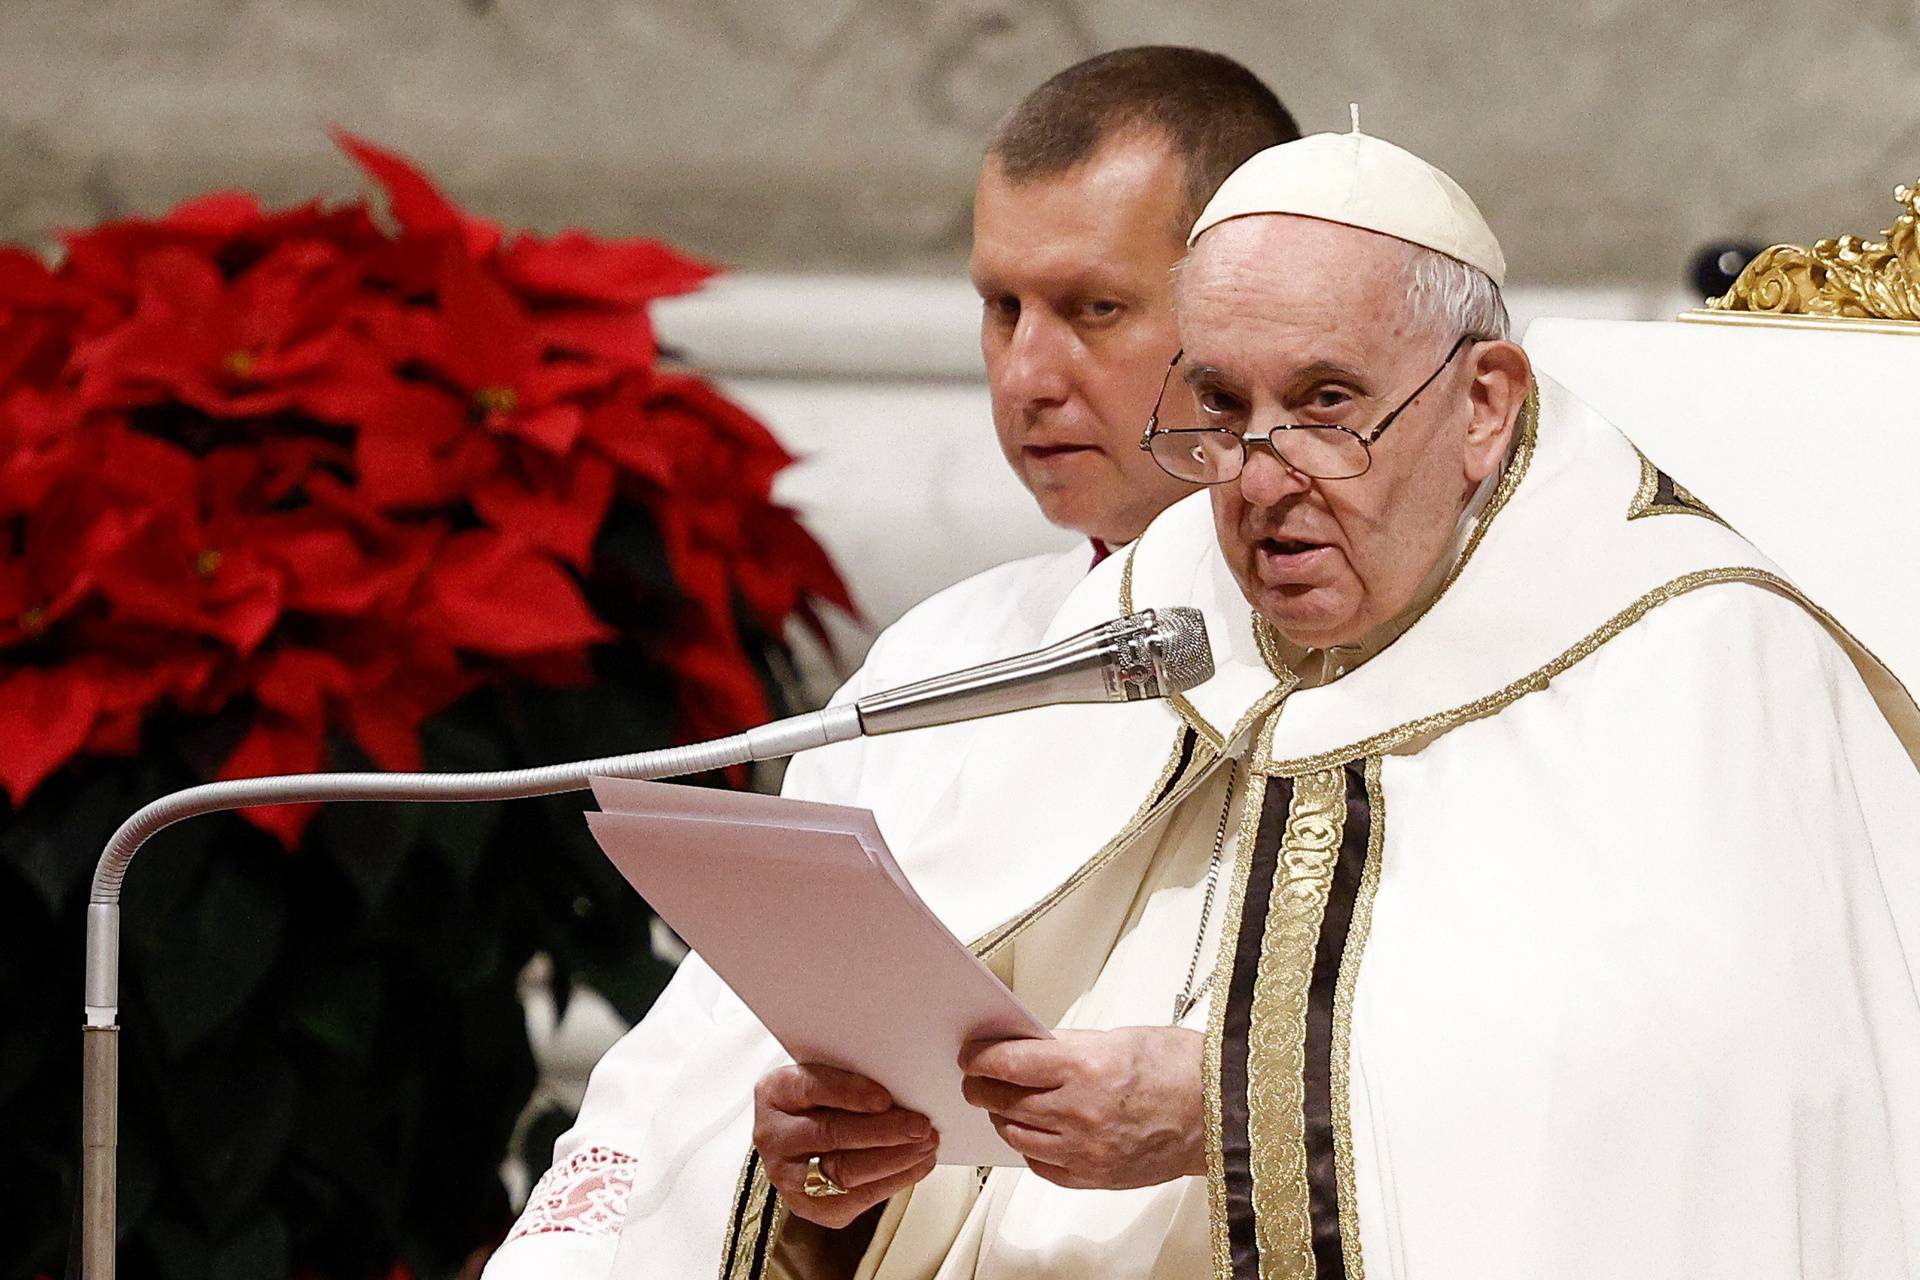 Pope Francis celebrates Christmas Eve mass at the Vatican